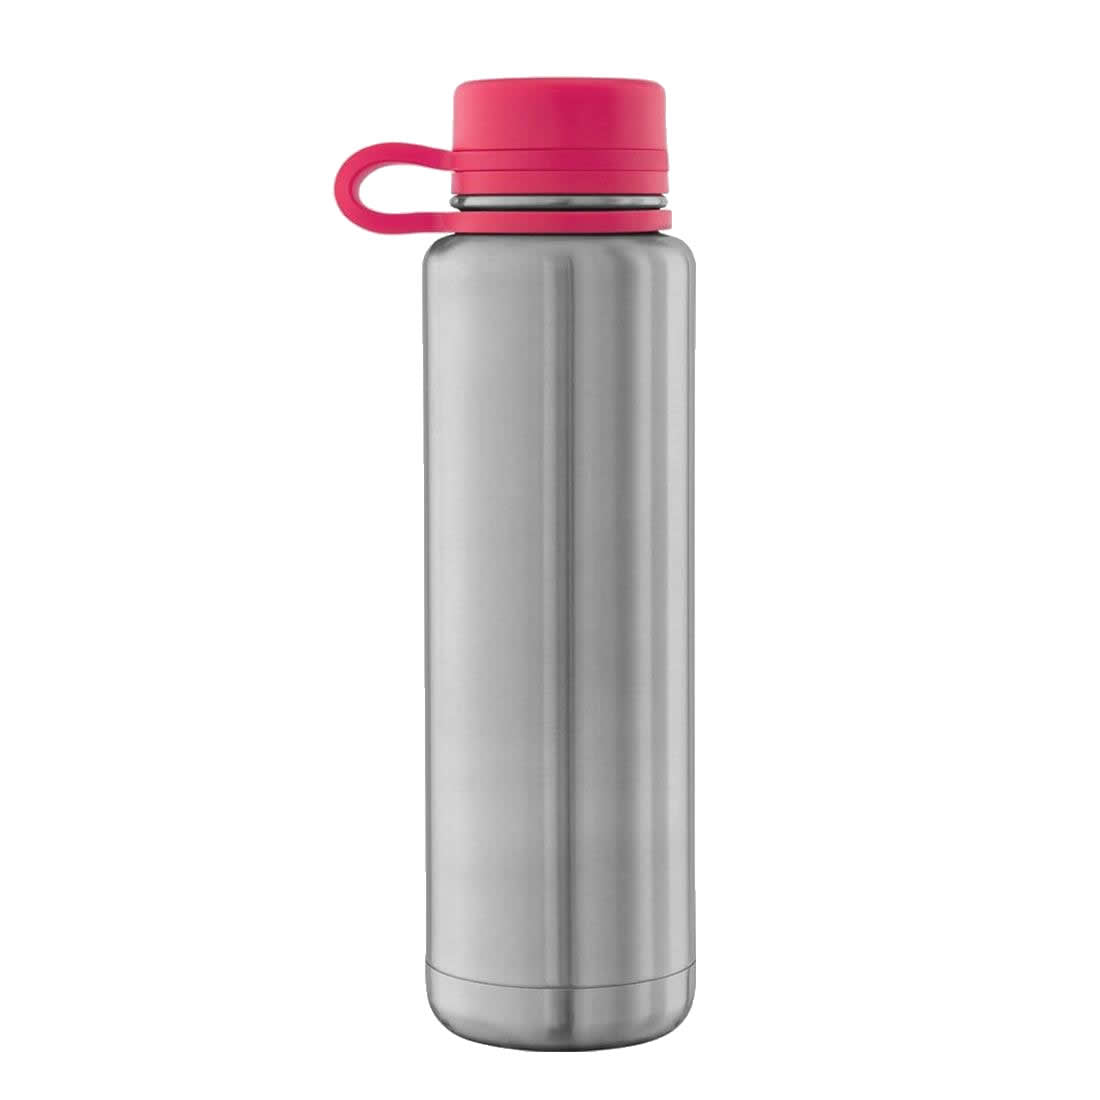 PlanetBox Stainless Steel Water Bottle 18oz/532ml